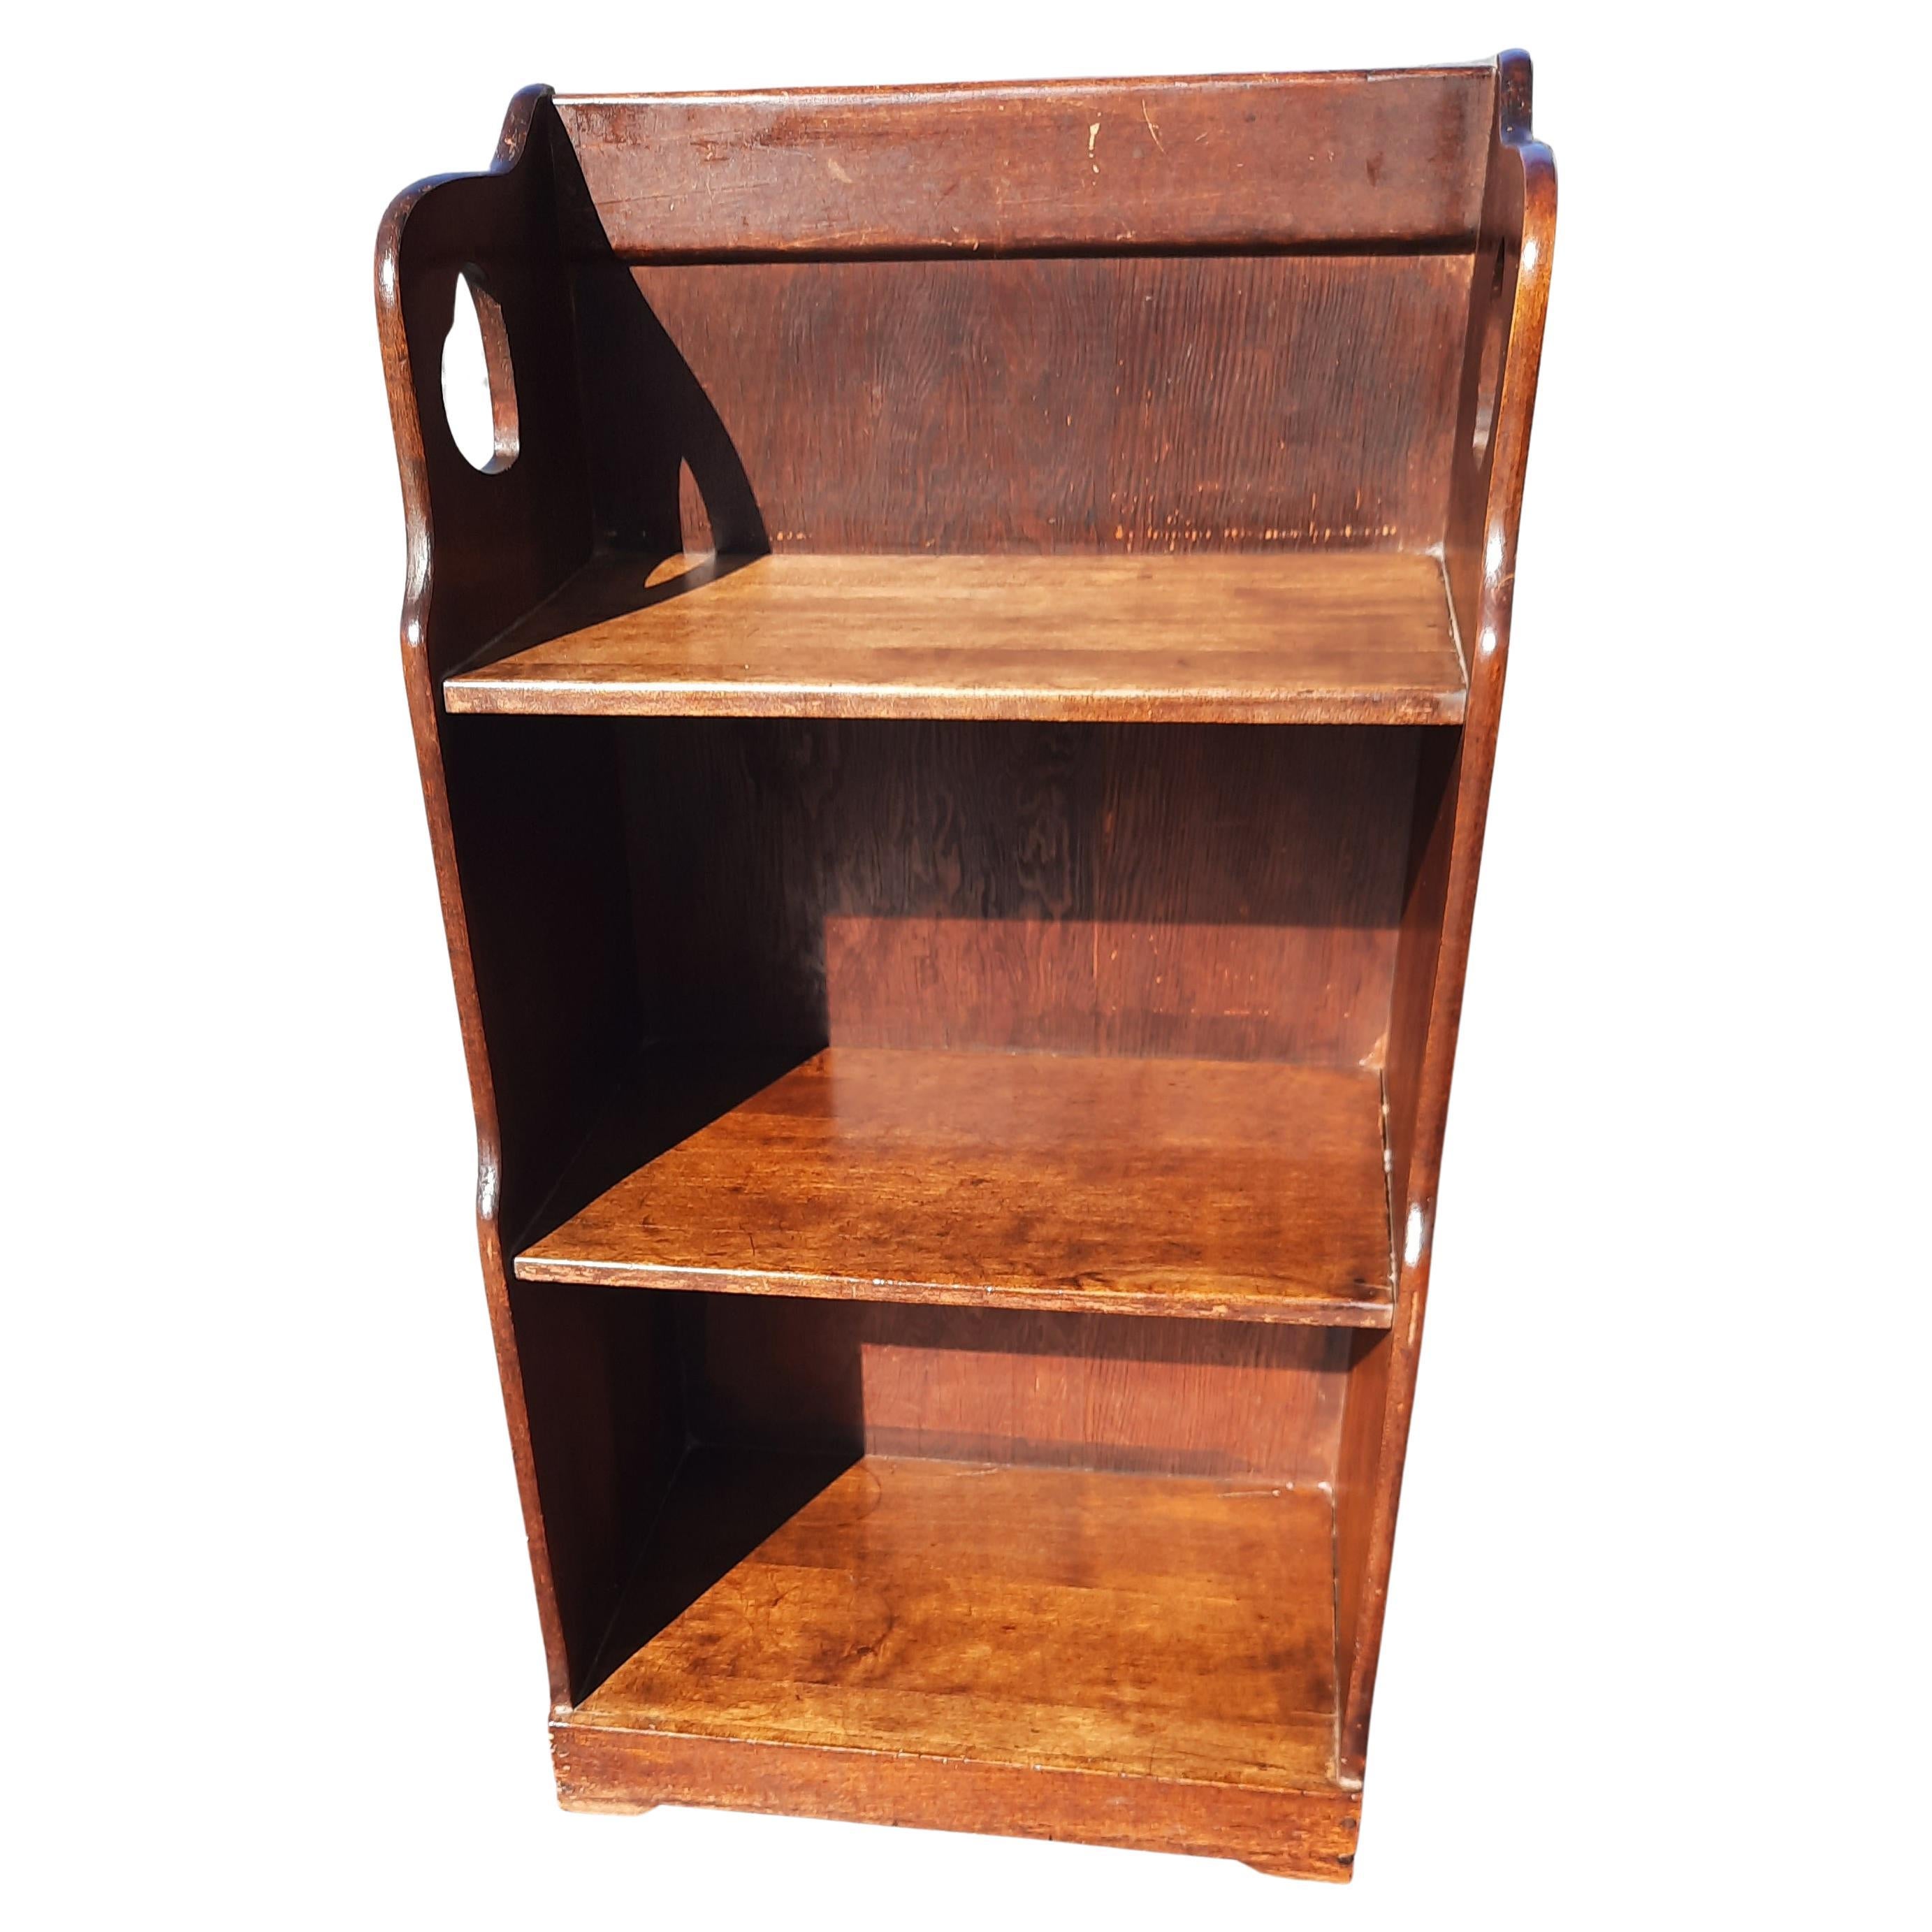 Small antique oak and pine bookcase / etagere. May not hold large books or items, but would make a great decorative piece of furniture in any room in your home. Measures 30